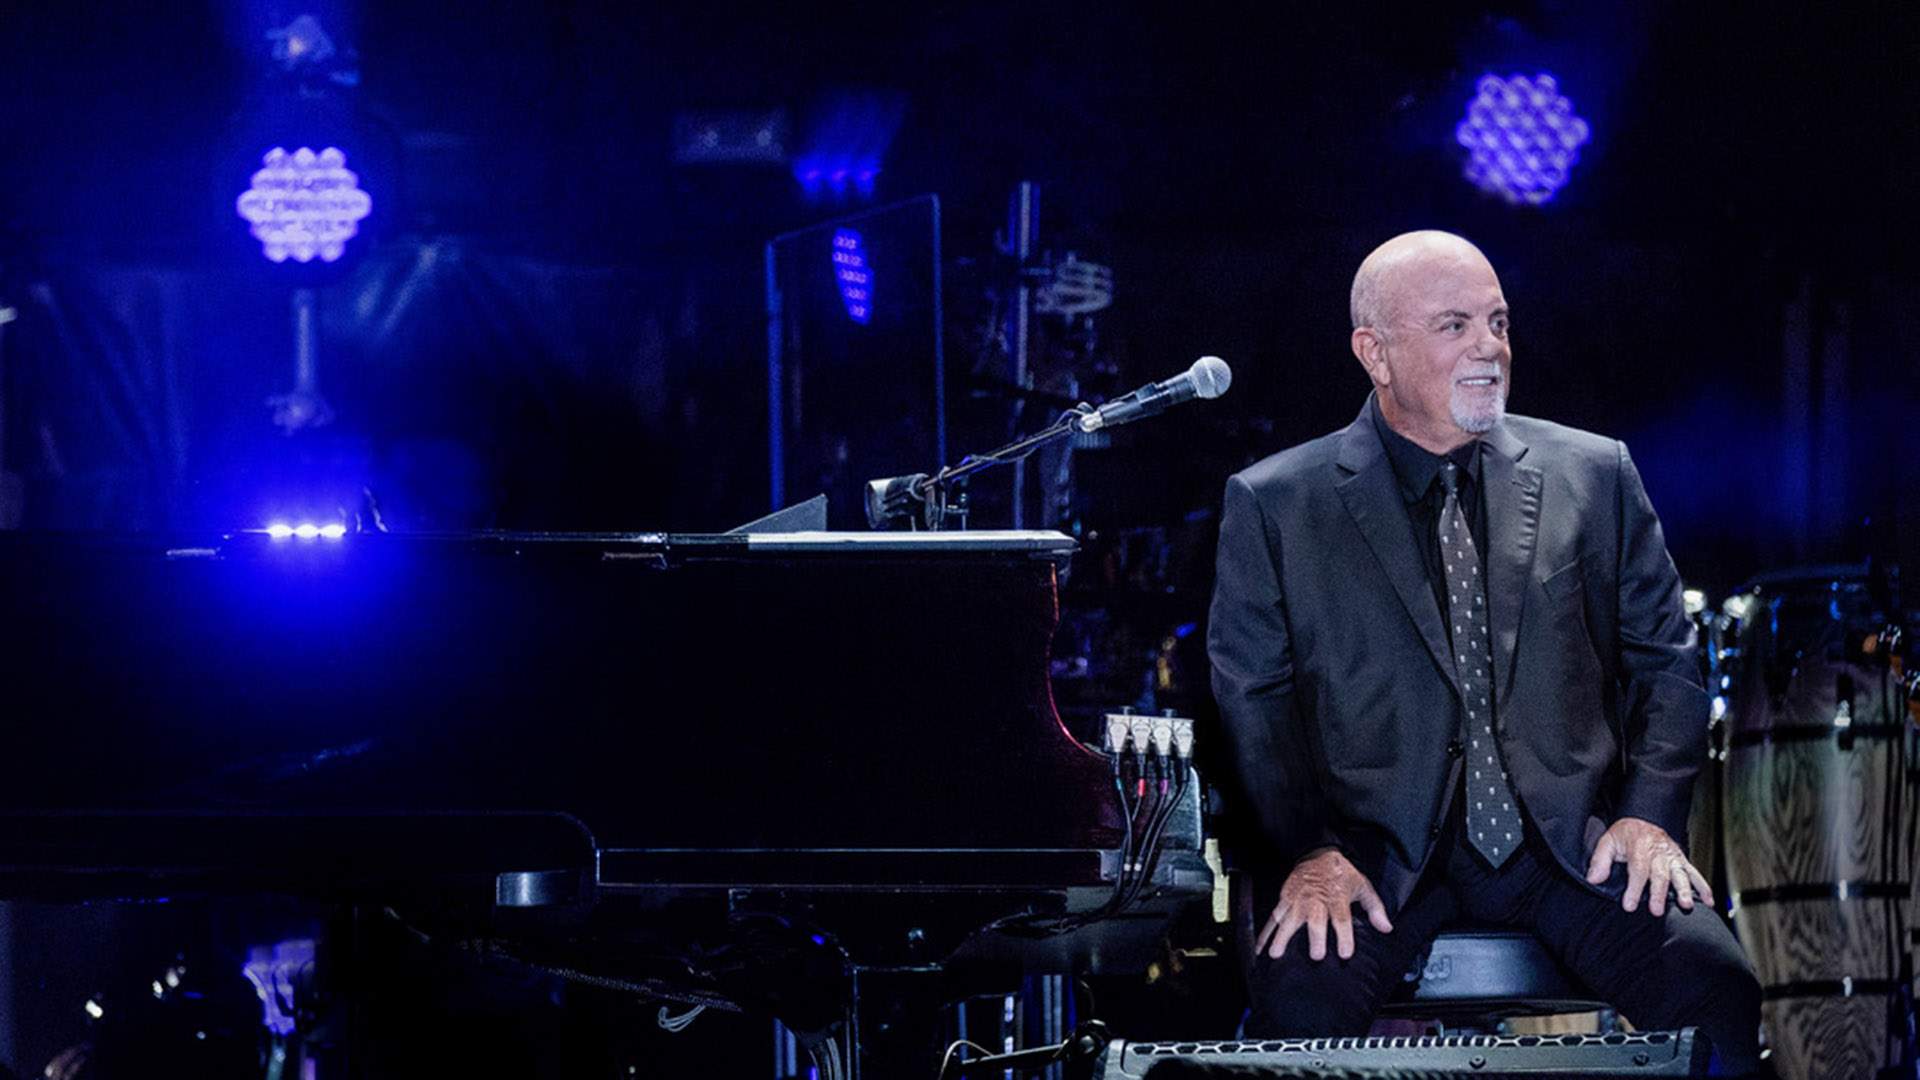 Billy Joel Is Coming to New Zealand This Summer Just for One Huge Concert at Eden Park